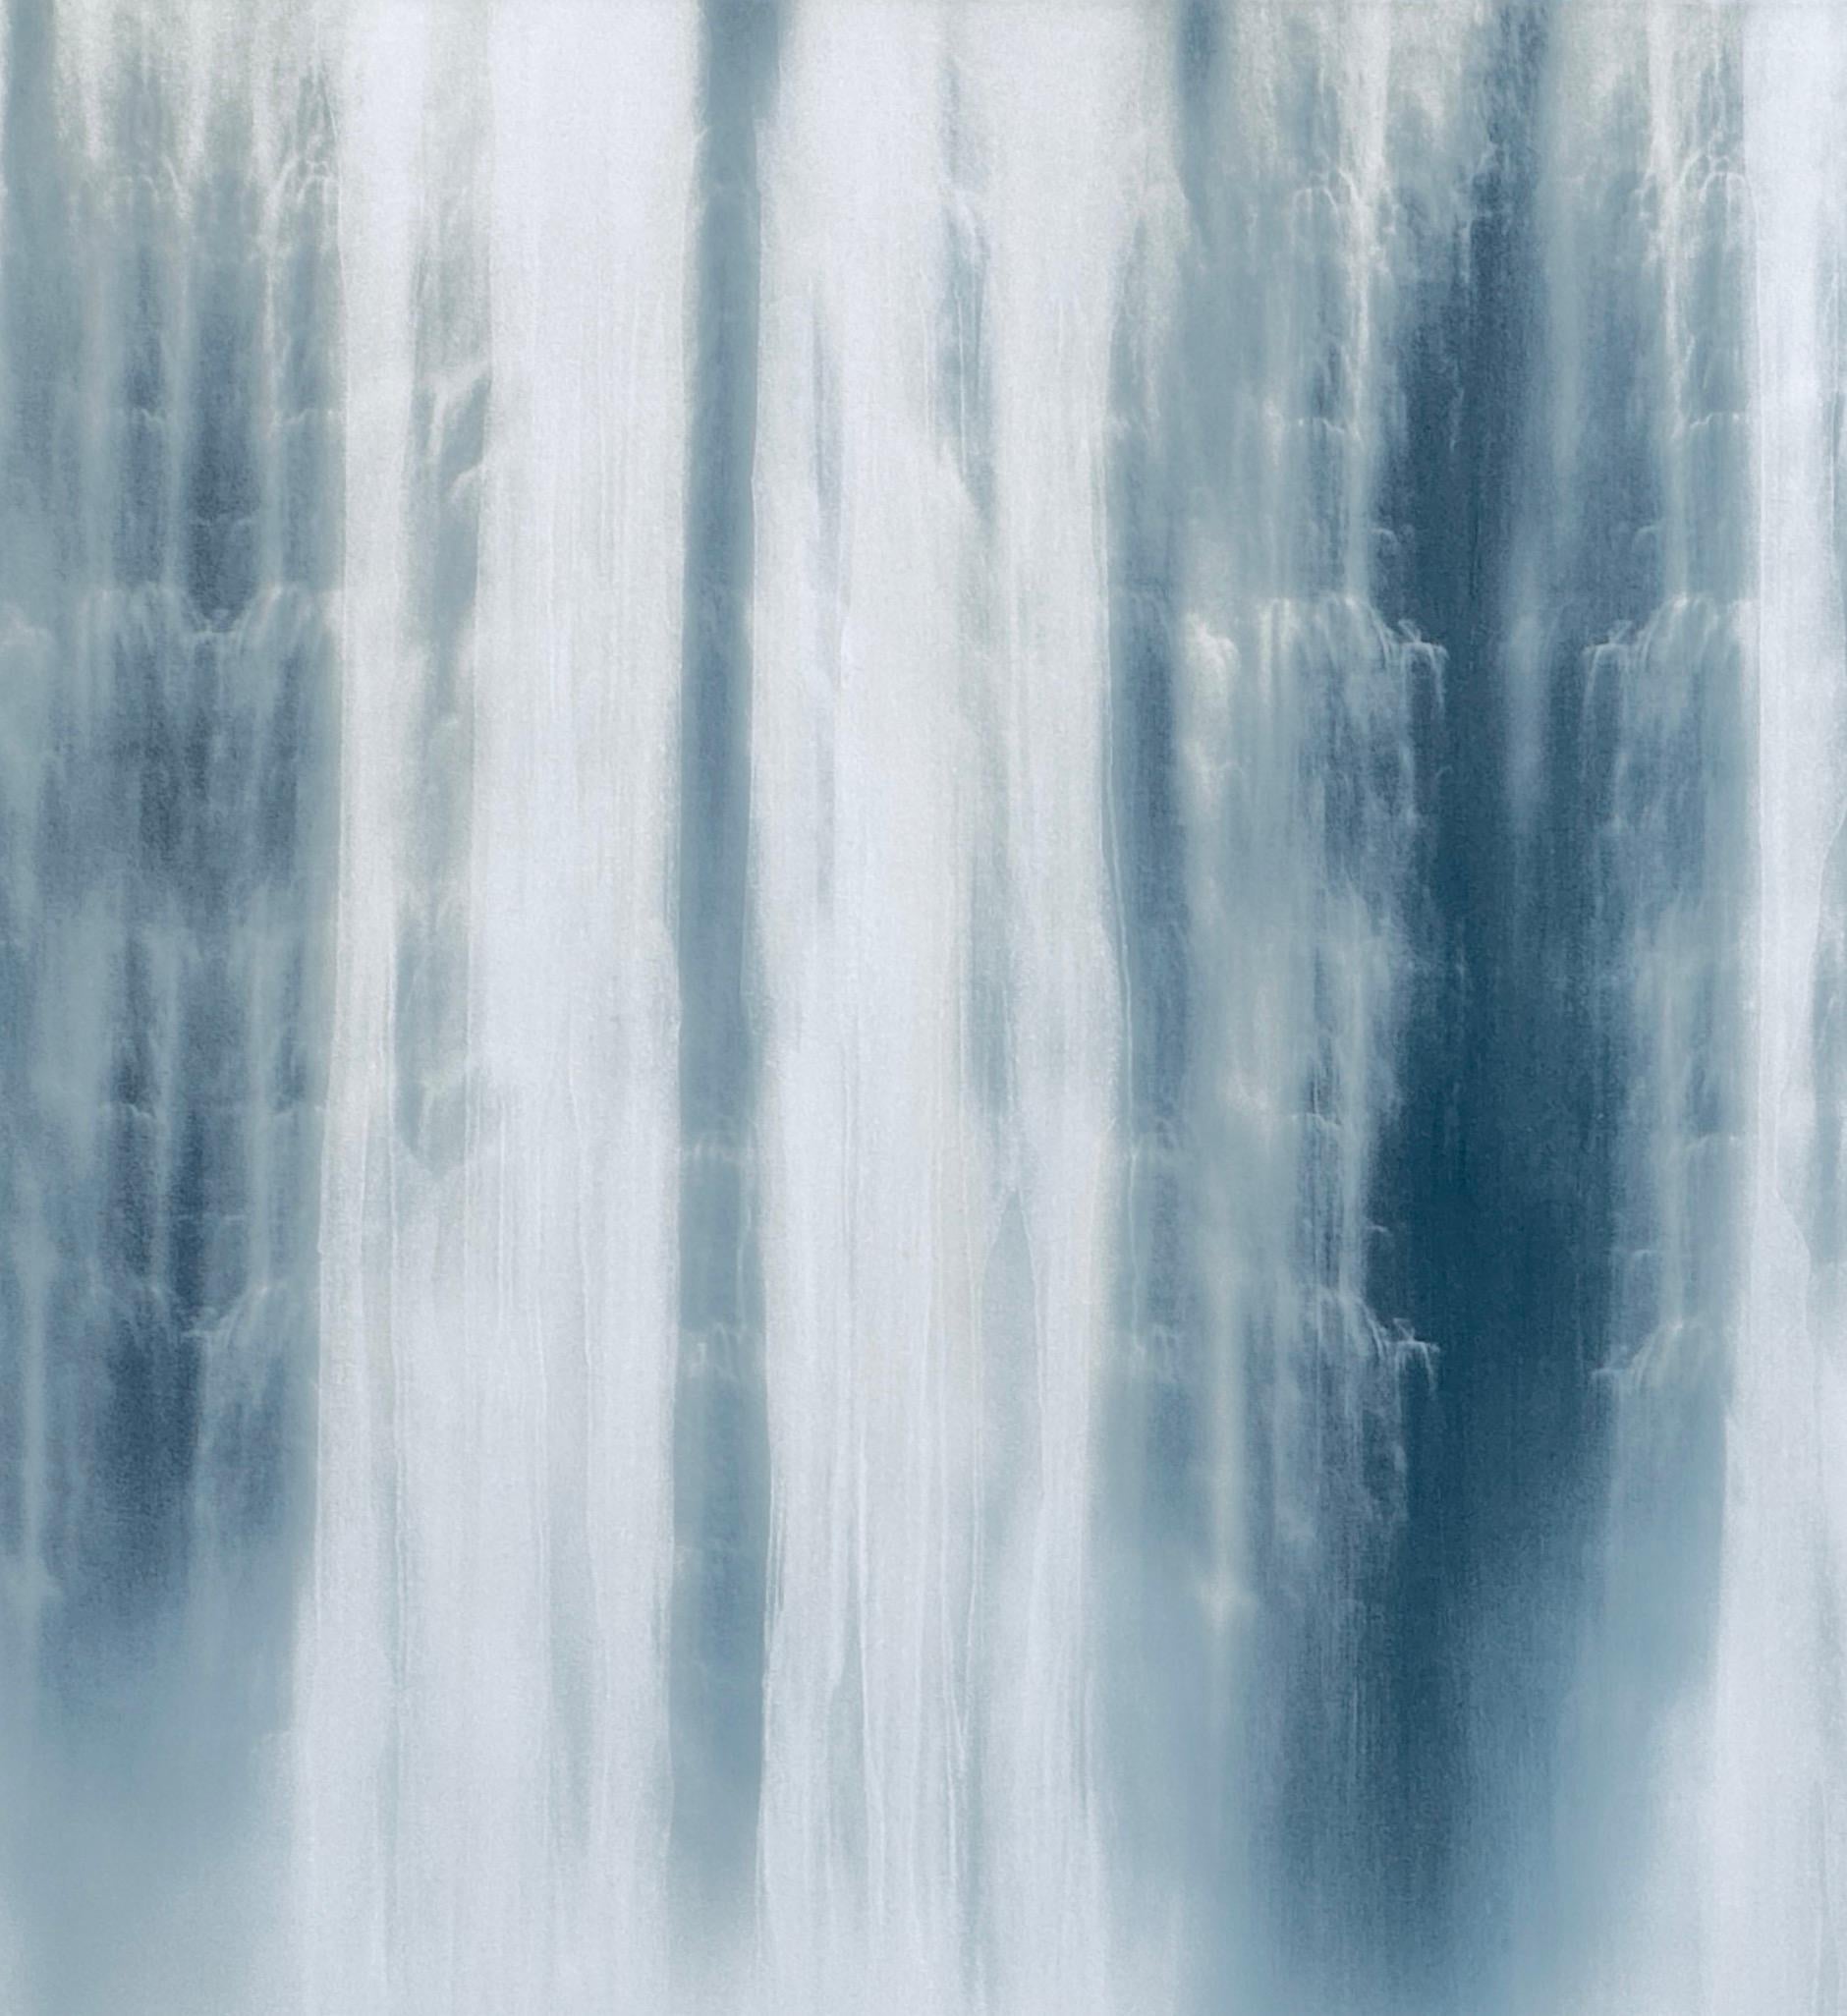 Christina Craemer is a Los Angeles-based artist who travels the world photographing water in its many forms, especially waterfalls. She combines countless images to create a striking composition.  This composition is printed on canvas and the